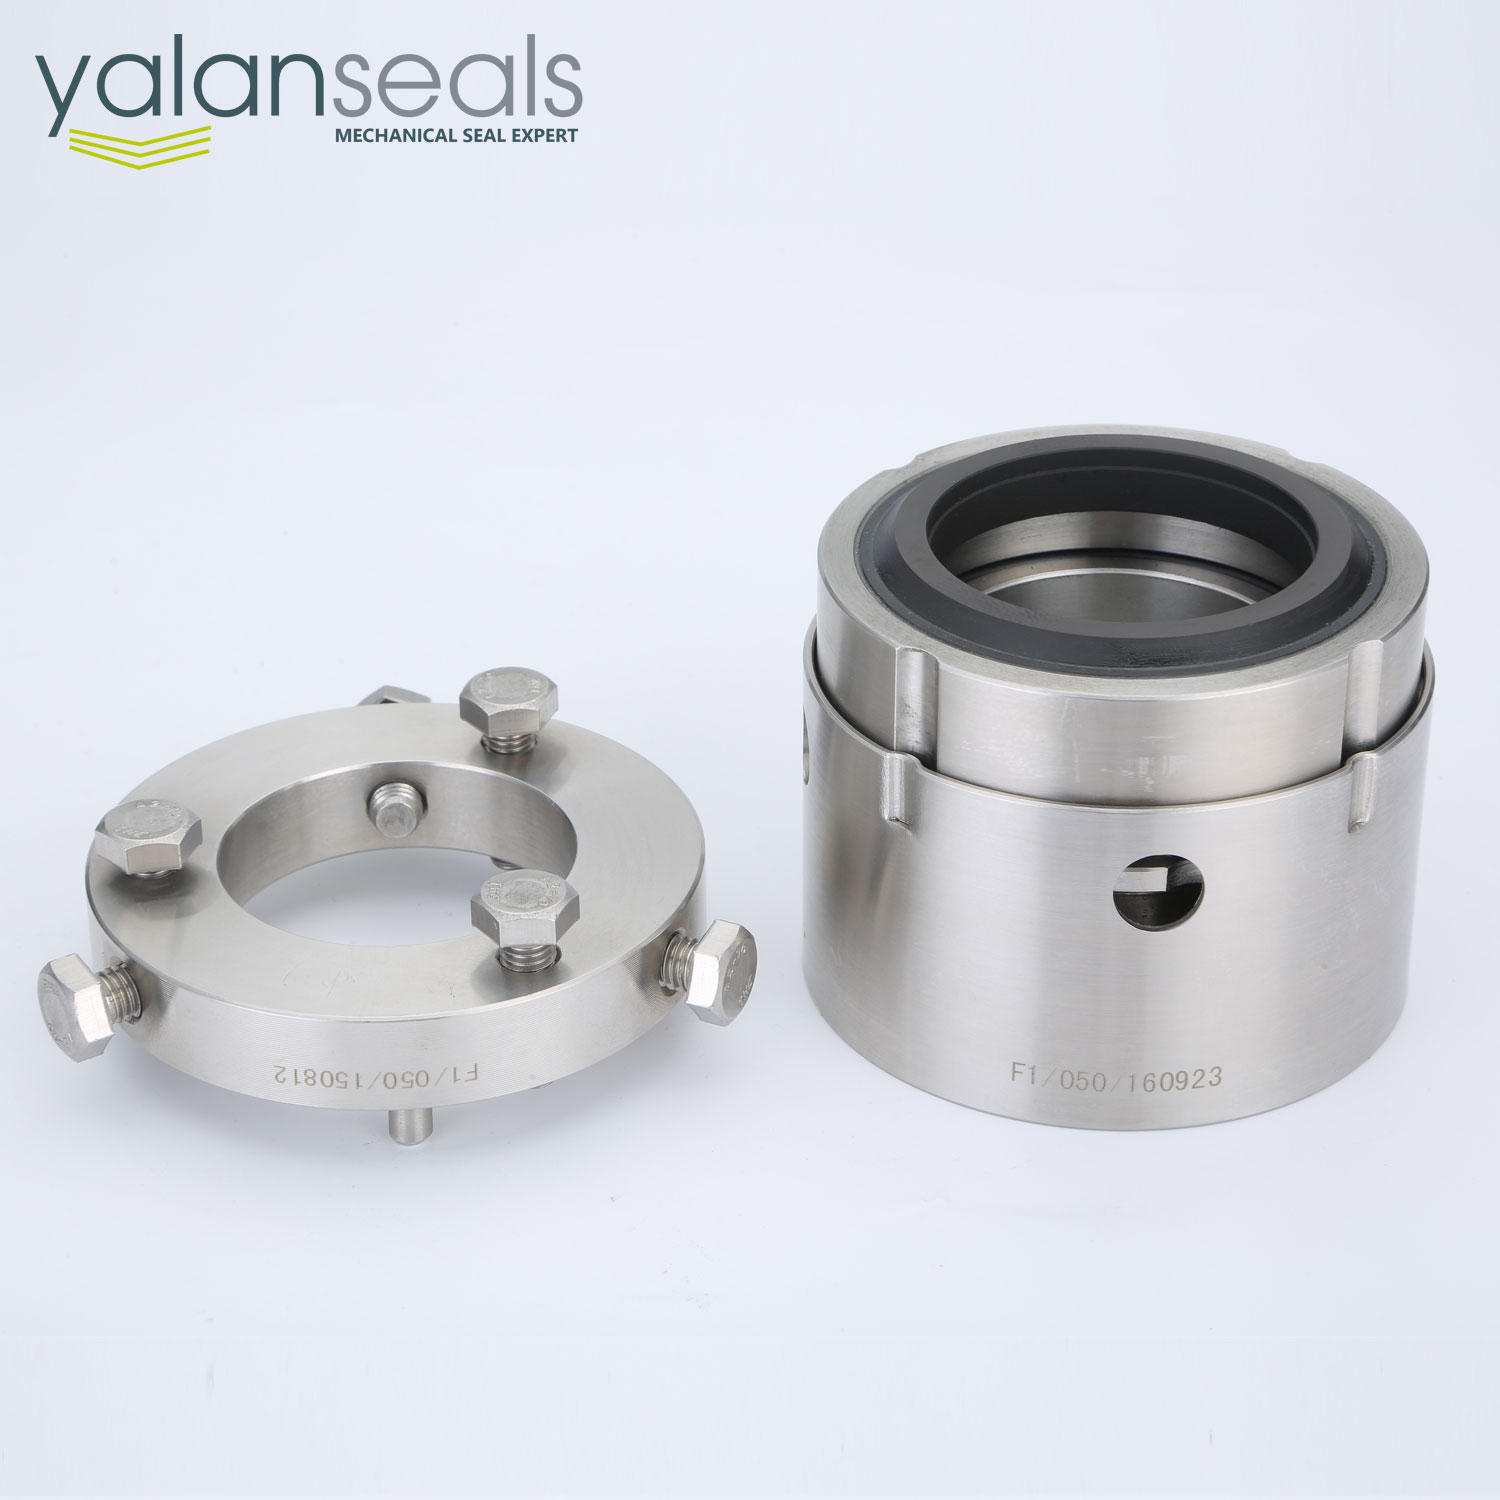 104 Mechanical Seal Carbon Face Rotary and Seat